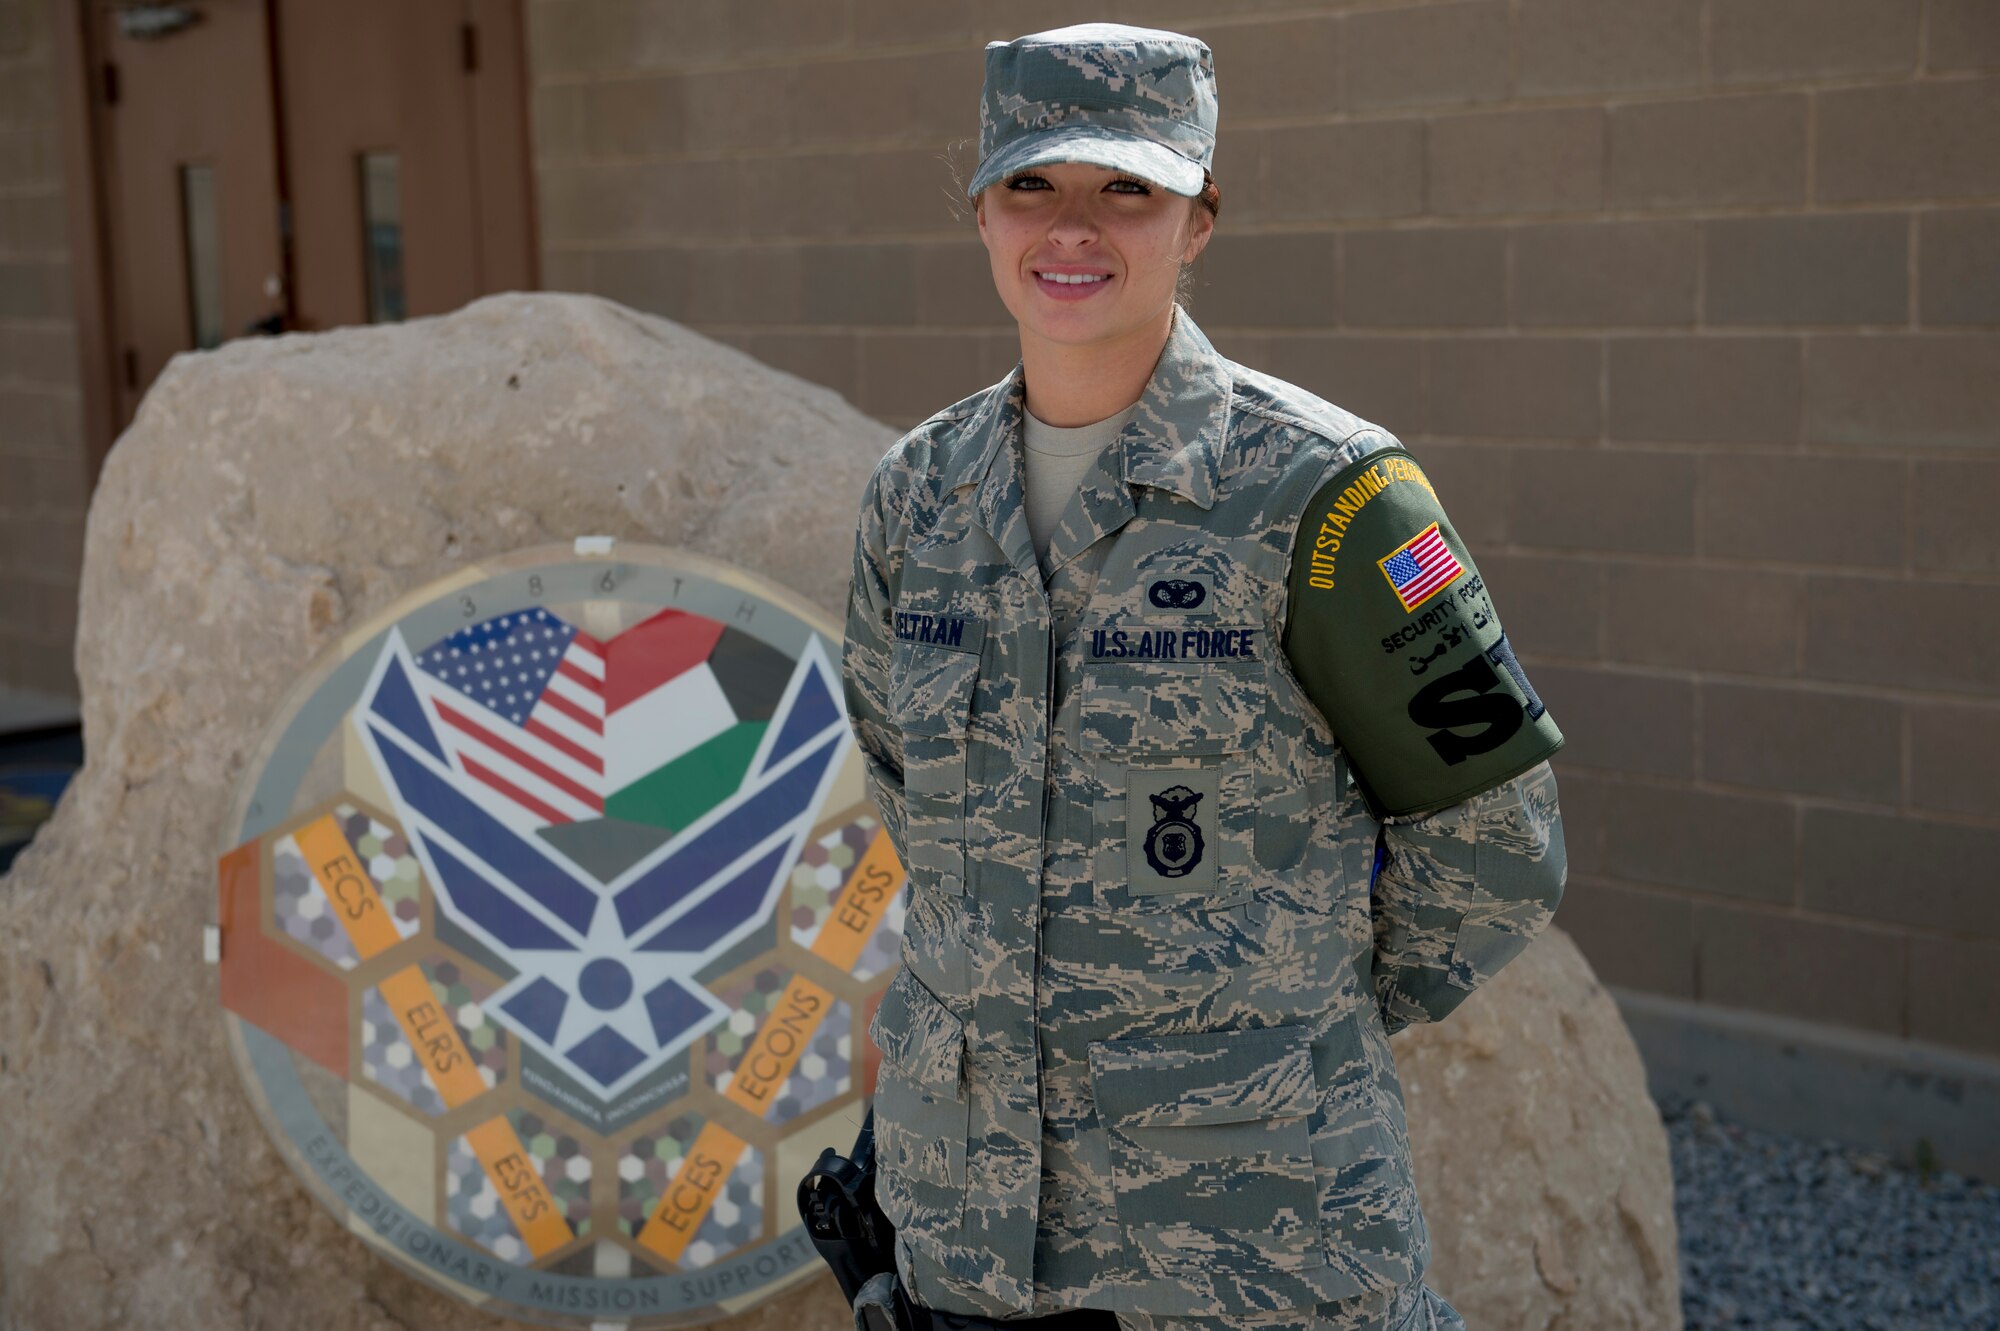 This week's Rock Solid Warrior is Senior Airman Brittany Beltran. Beltran is a pass and registration specialist with the 386th Expeditionary Security Forces Squadron. The Toledo, Ohio native is deployed from the 81st Security Forces Squadron, Keesler Air Force Base, Mississippi.